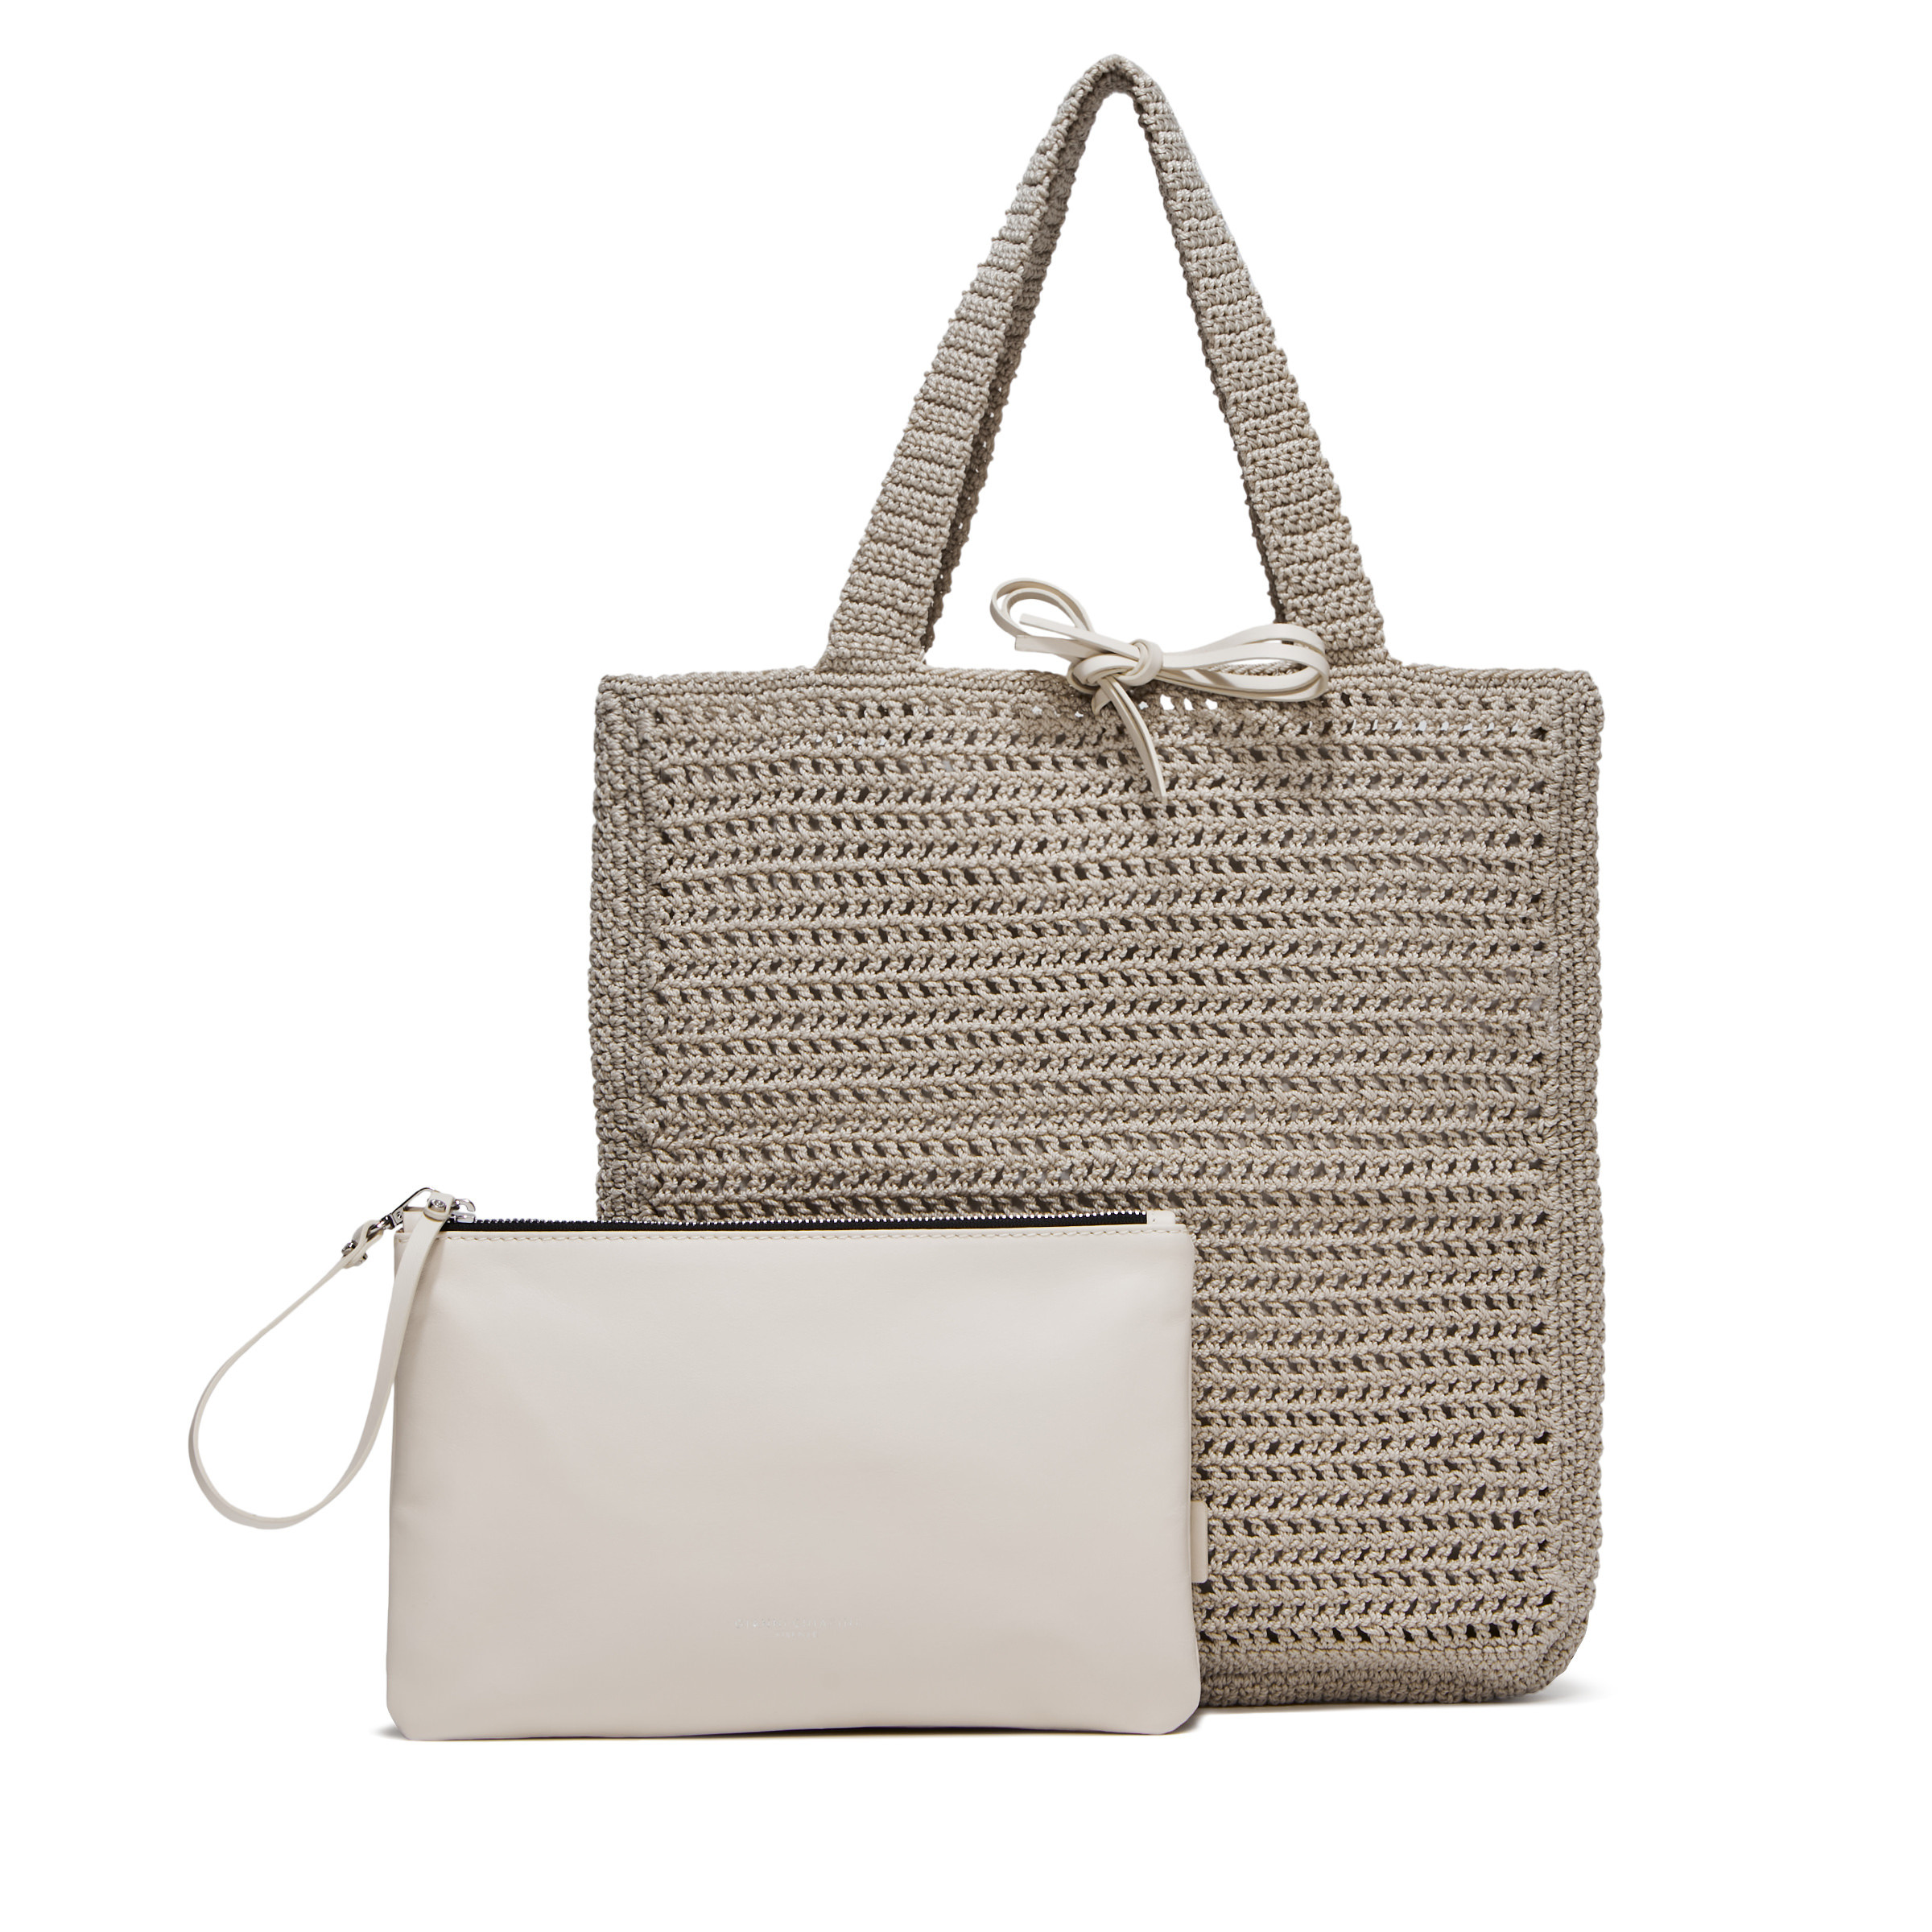 Gianni Chiarini - Victoria bag in leather and fabric, Pearl Grey, large image number 2